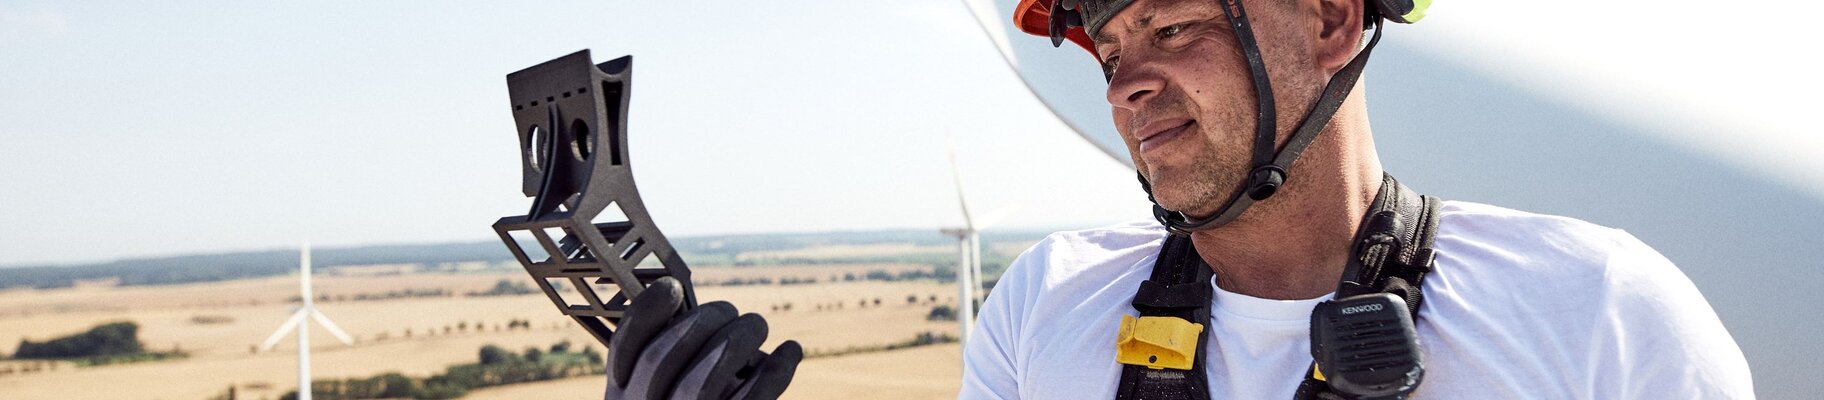 worker replacing spare parts on top of a wind turbine